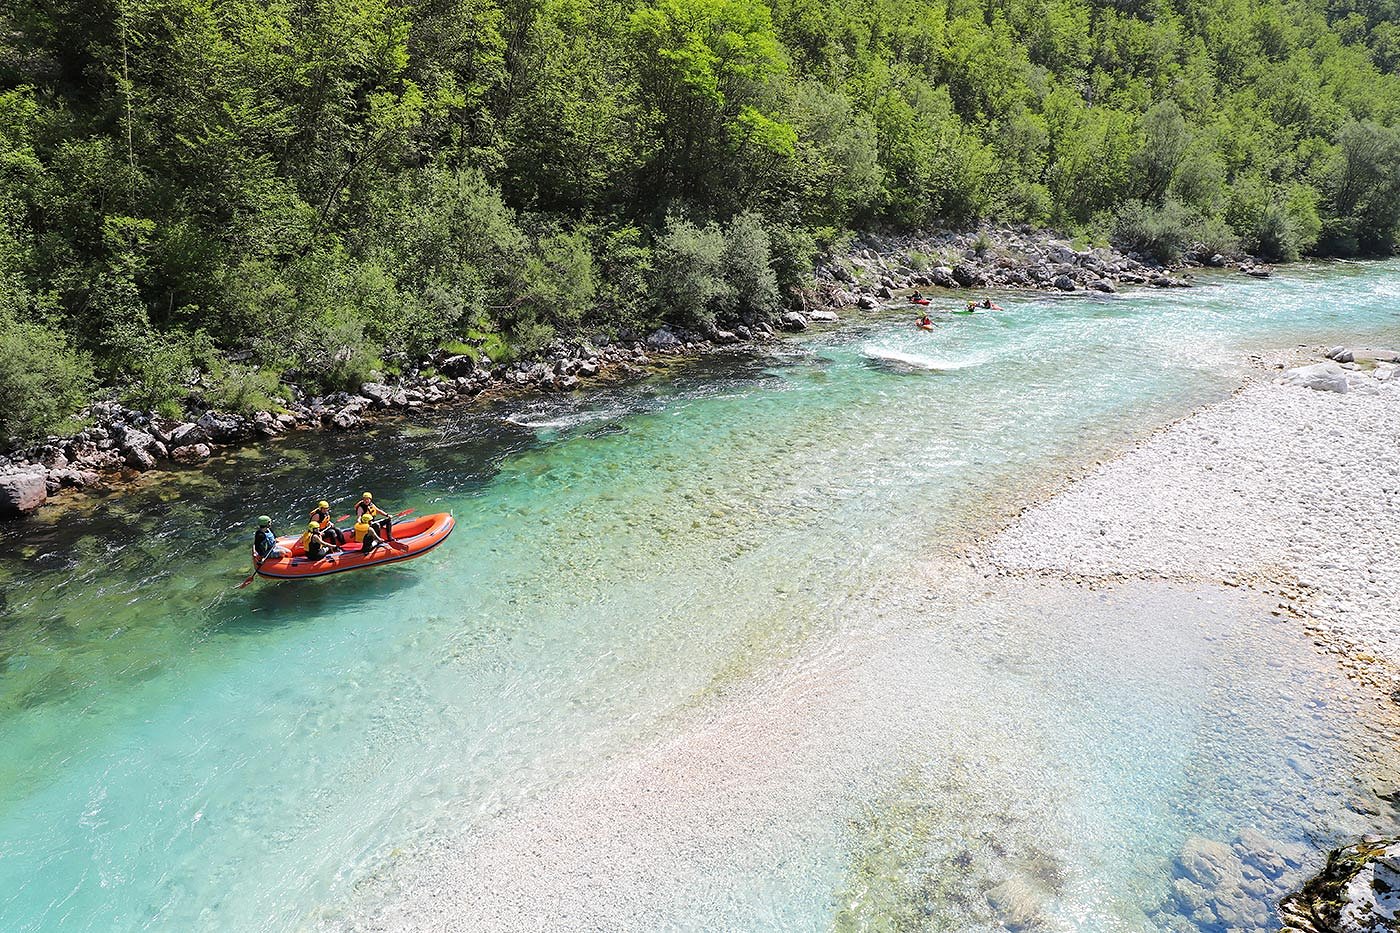 A group on a raft and kayakers descend the Soča river rapids